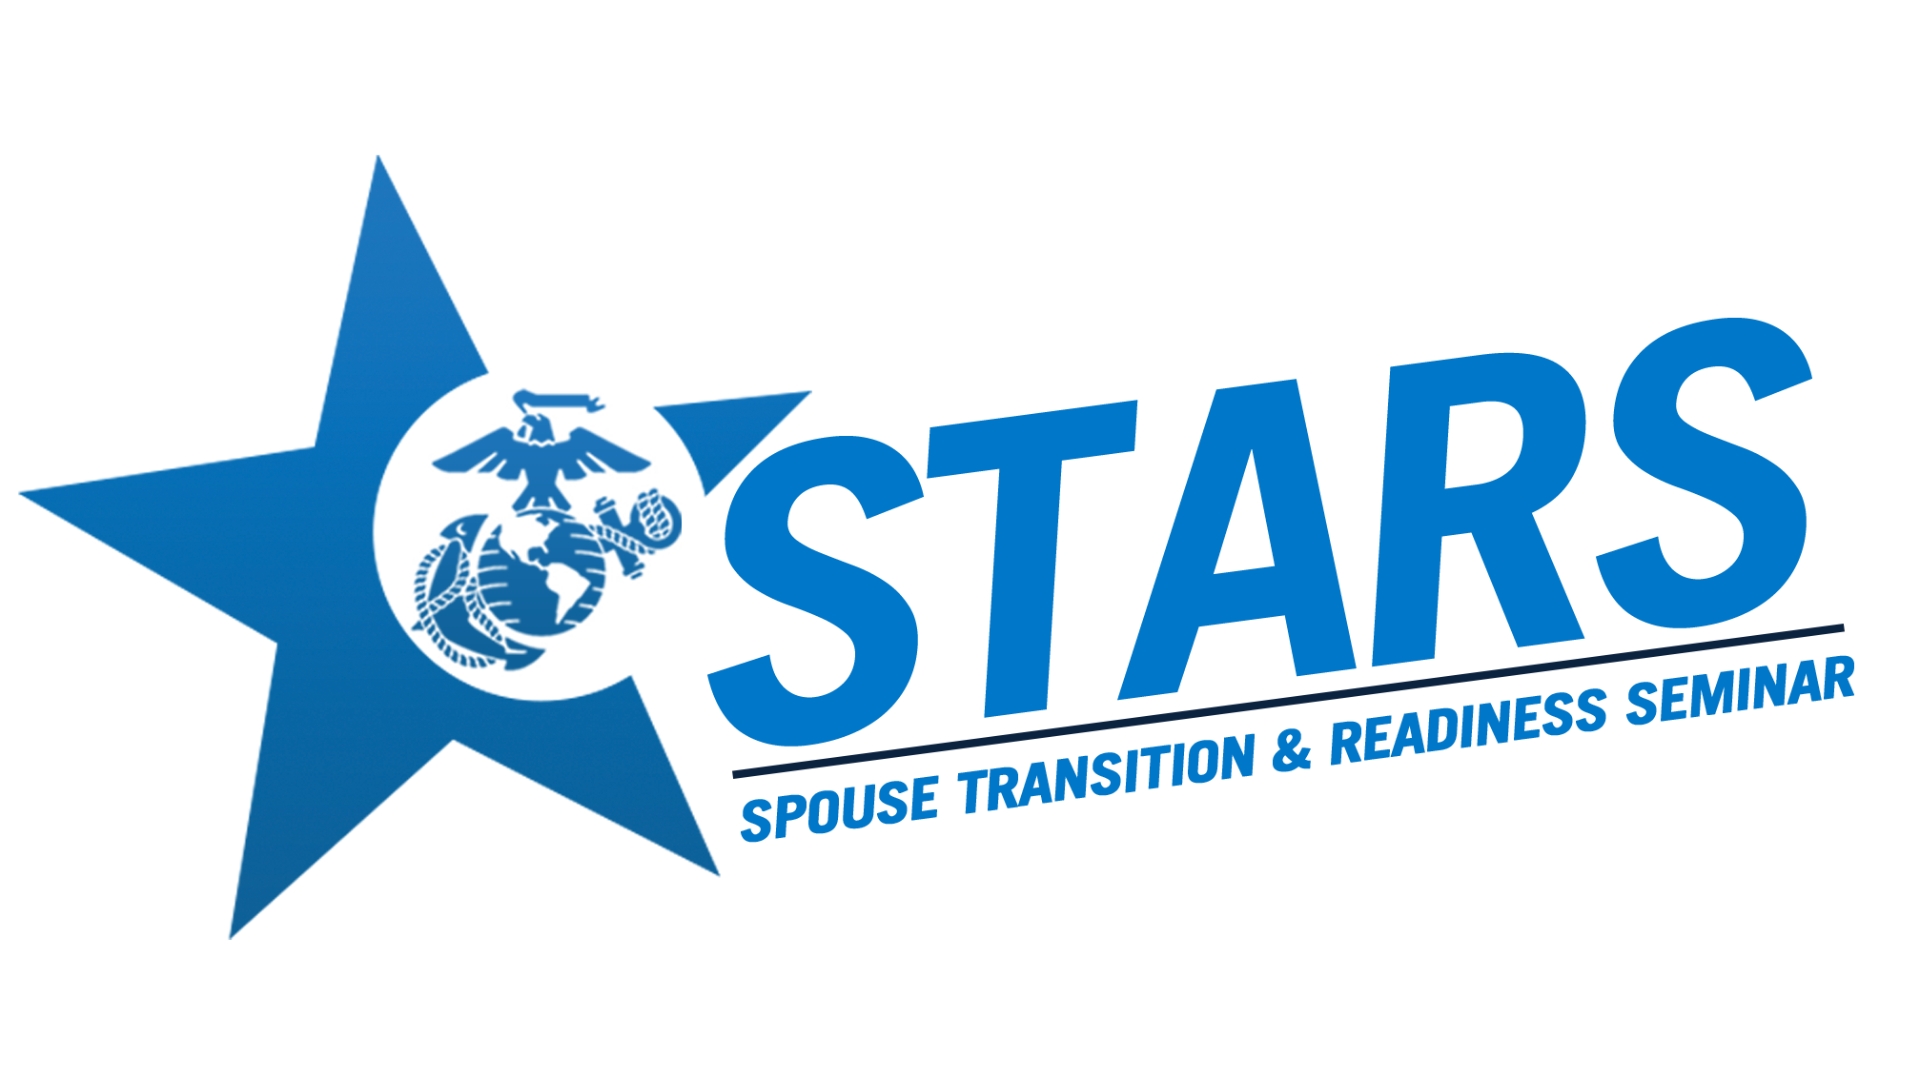 Spouse Transition & Readiness Seminar (S.T.A.R.S.) (Hybrid) 